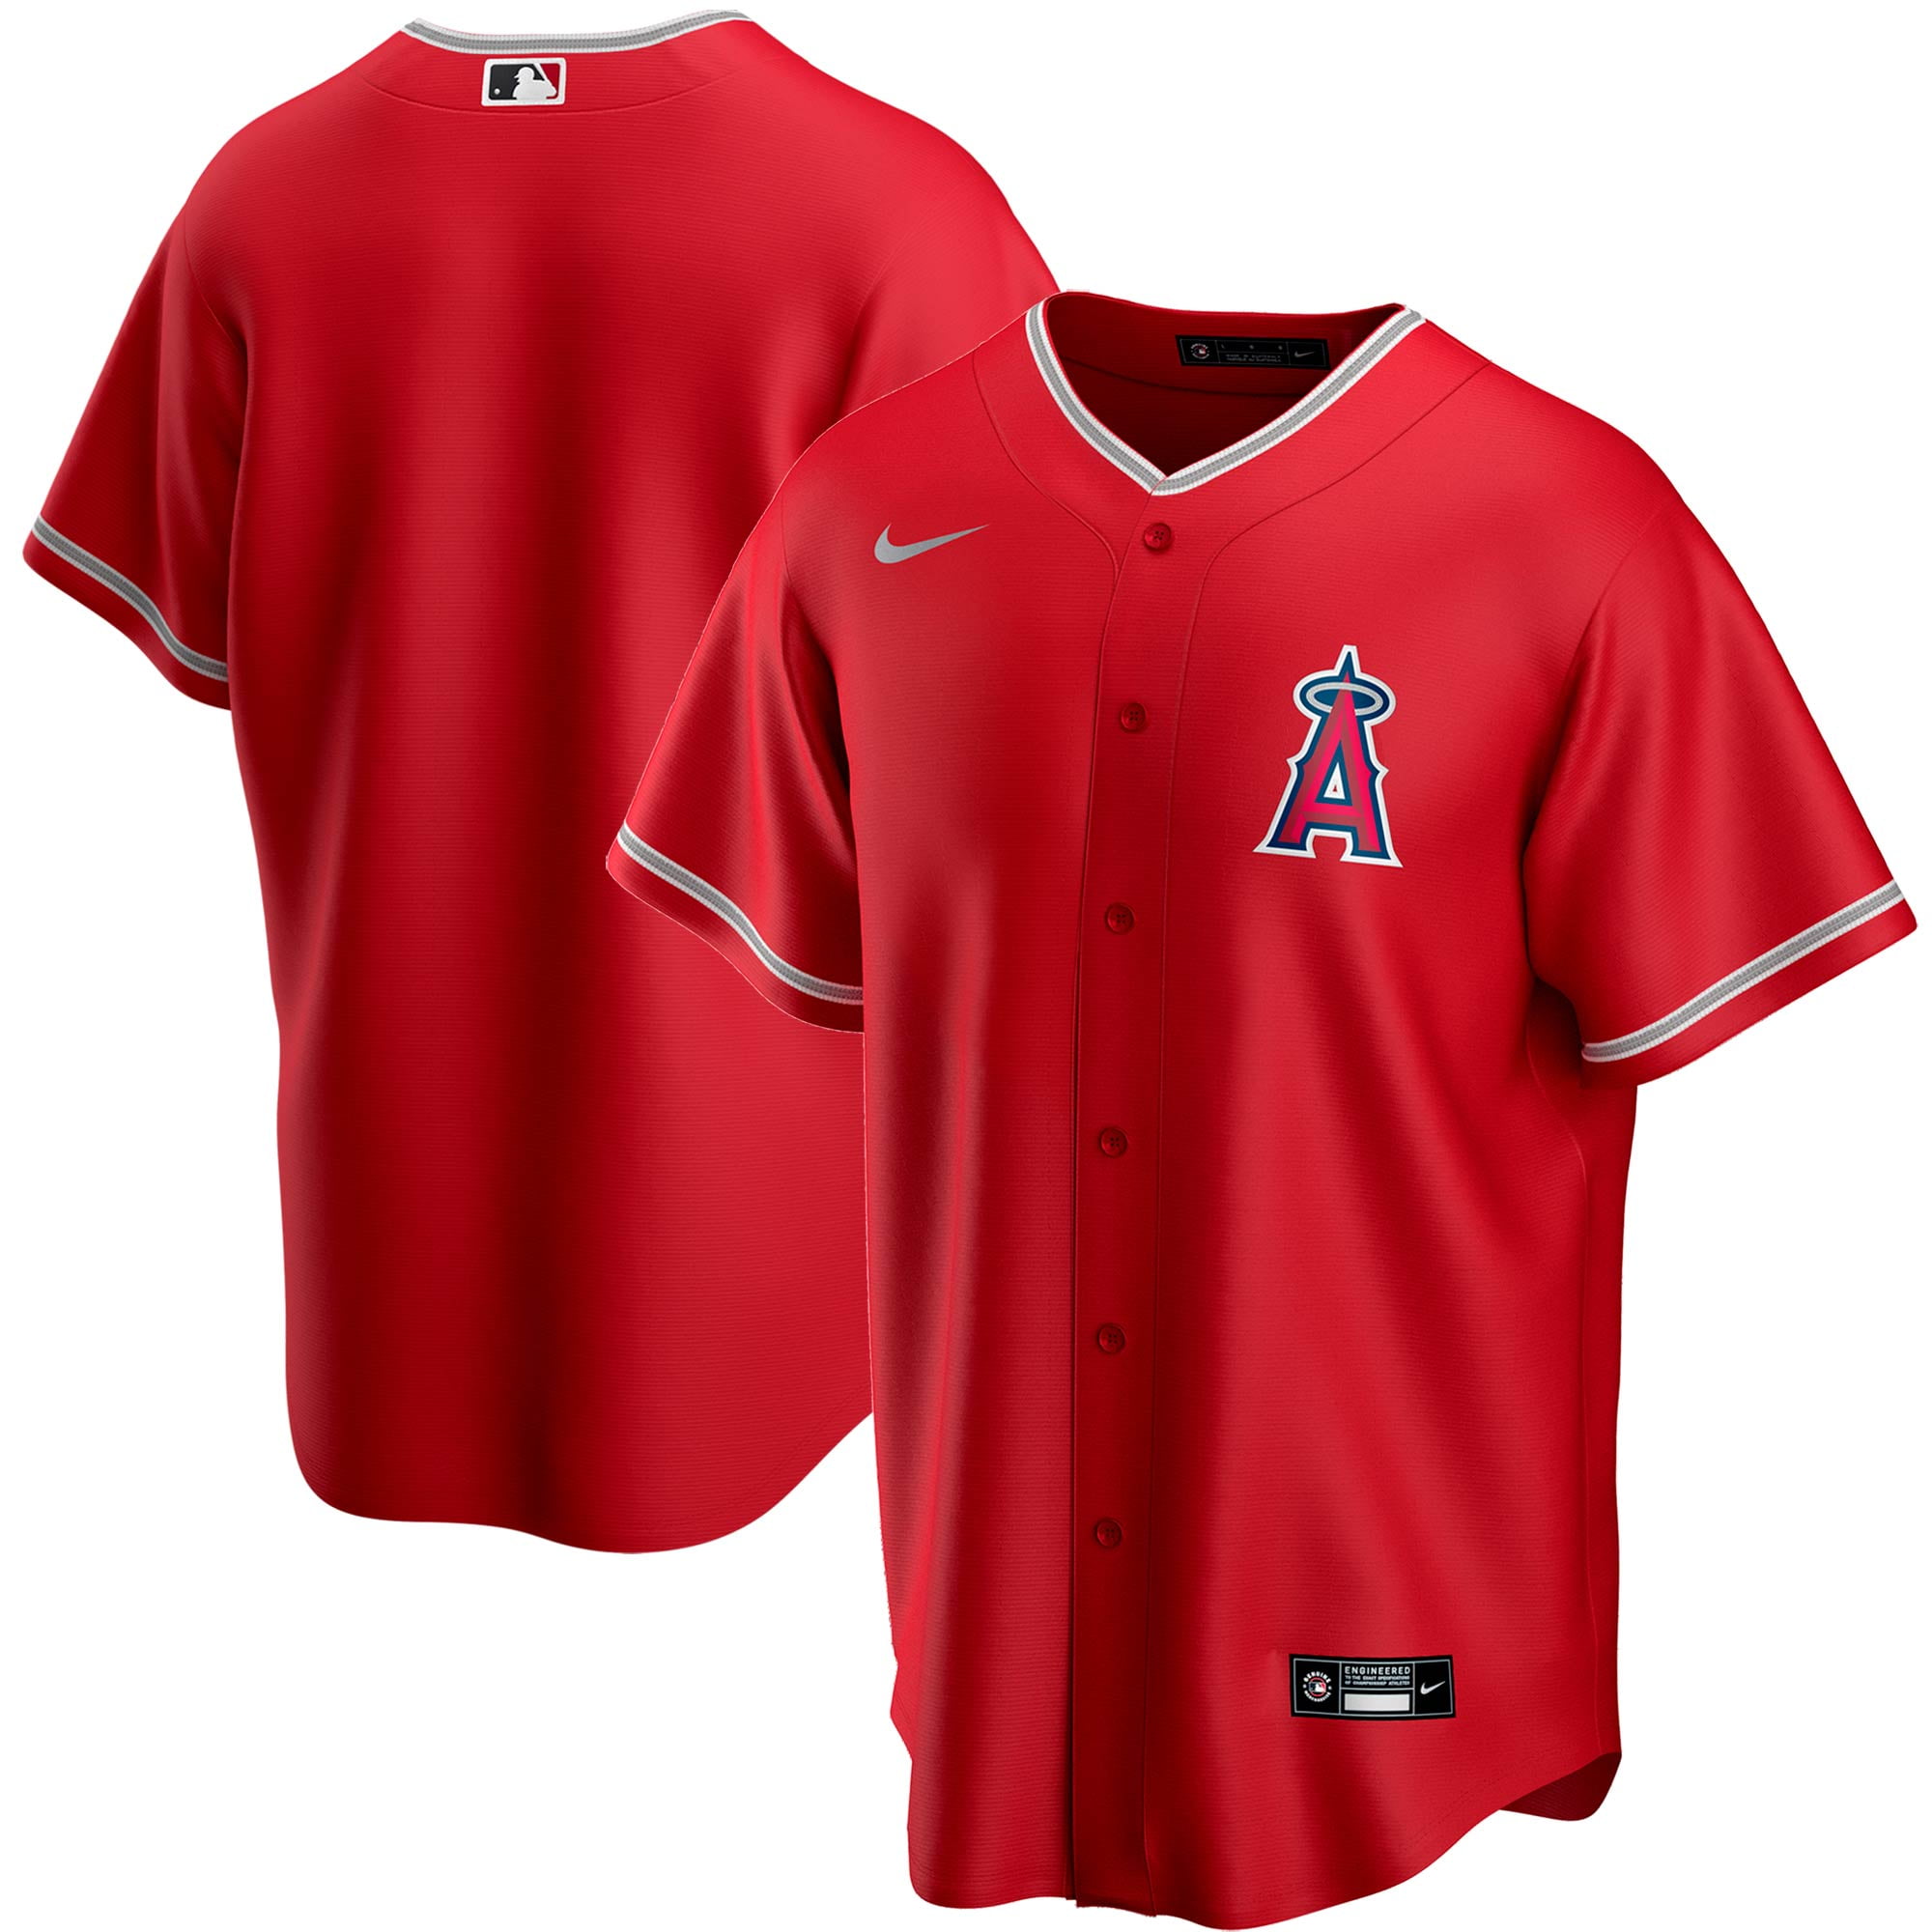 angels spring training jersey